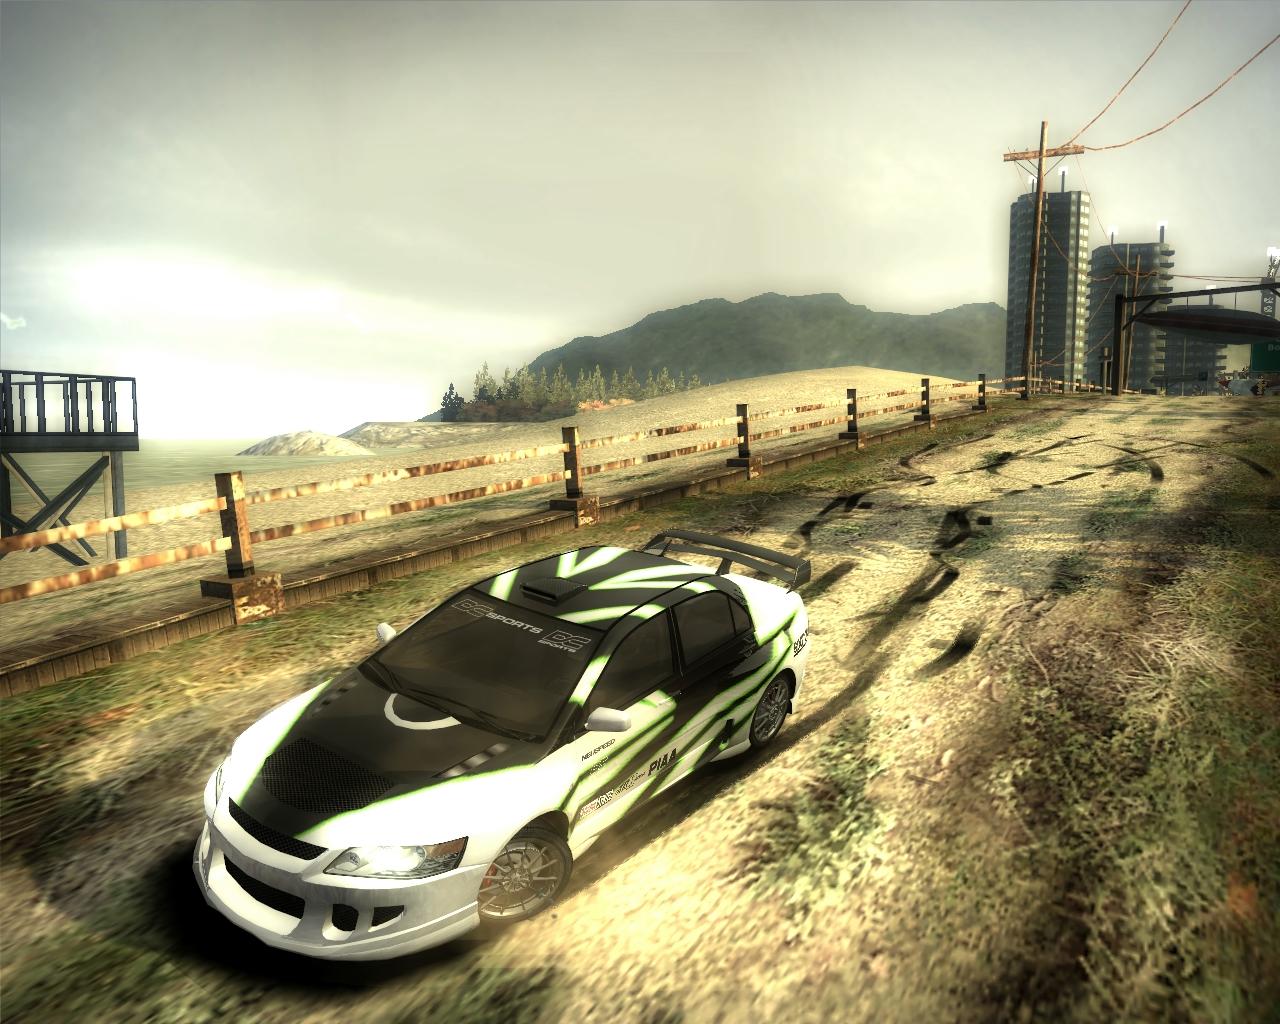 Nfs mw 2005 моды. NFS most wanted. NFS MW 2005. Нид фор СПИД мост вантед 2005. Игра NFS most wanted 2005.